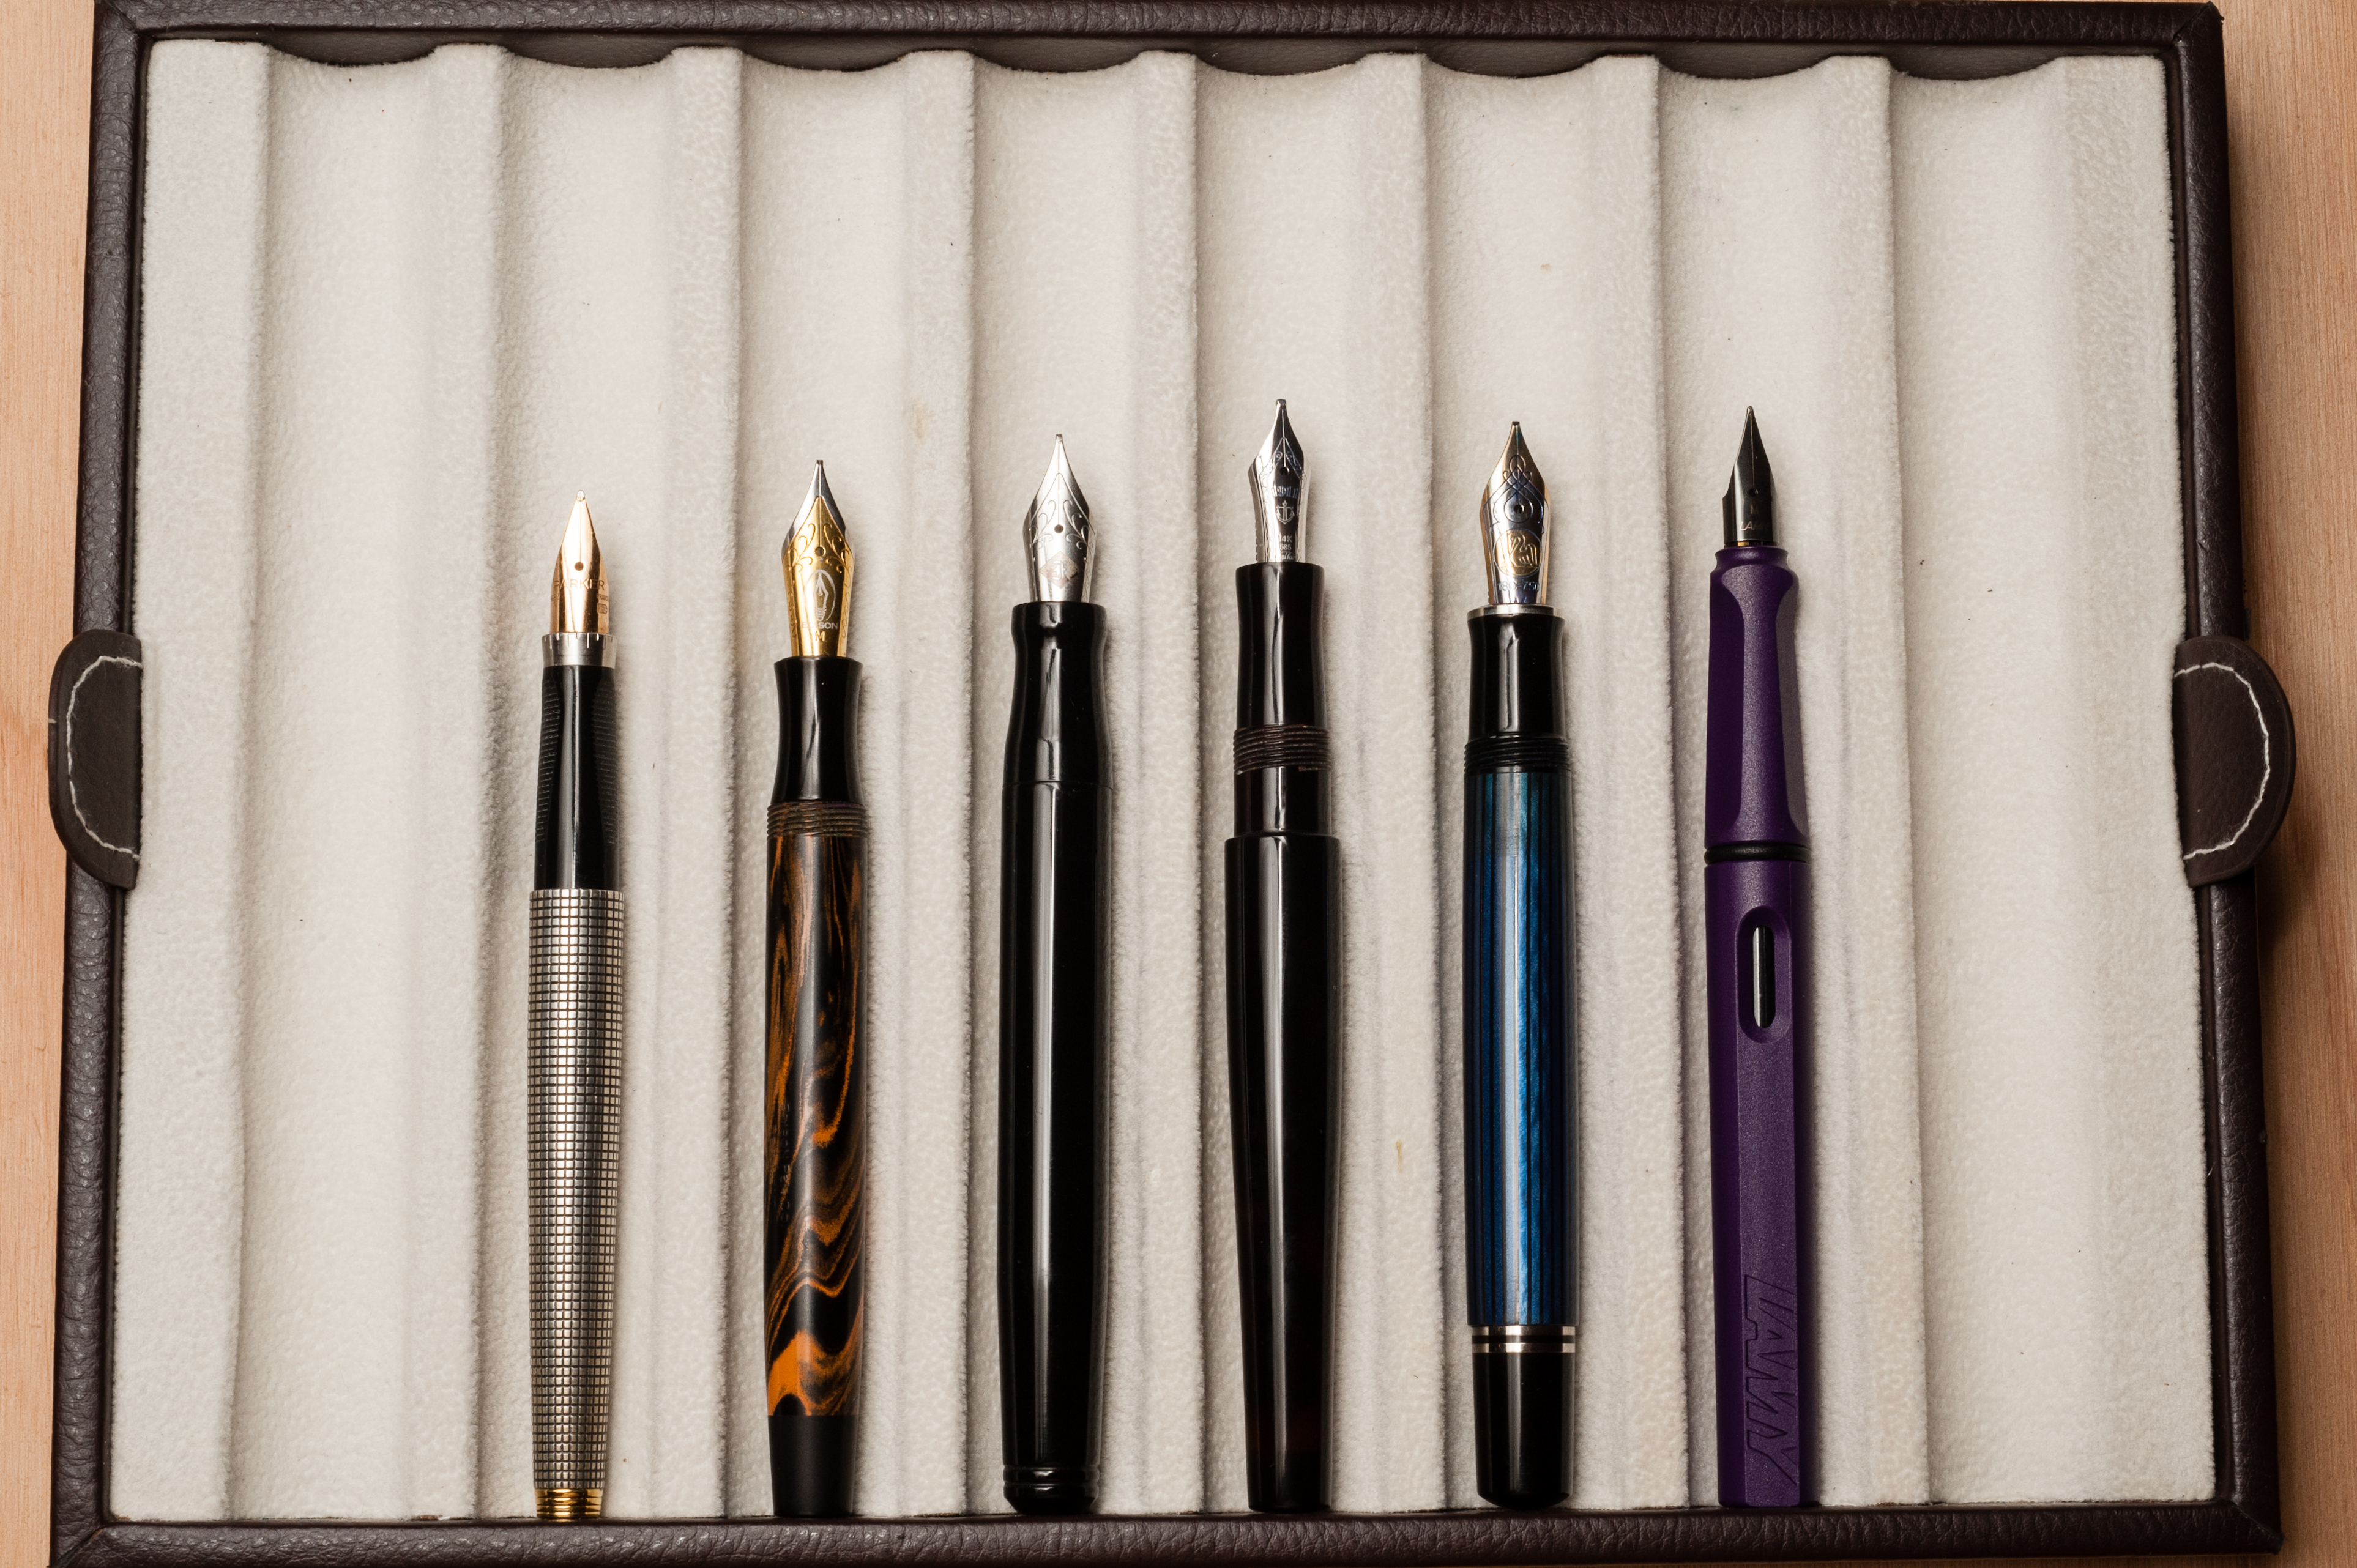 Unposted pens from left to right: Parker 75, Edison Beaumont, Franklin-Christoph Model 20, Newton Townsend Slim Short, Pelikan M805, and Lamy Safari